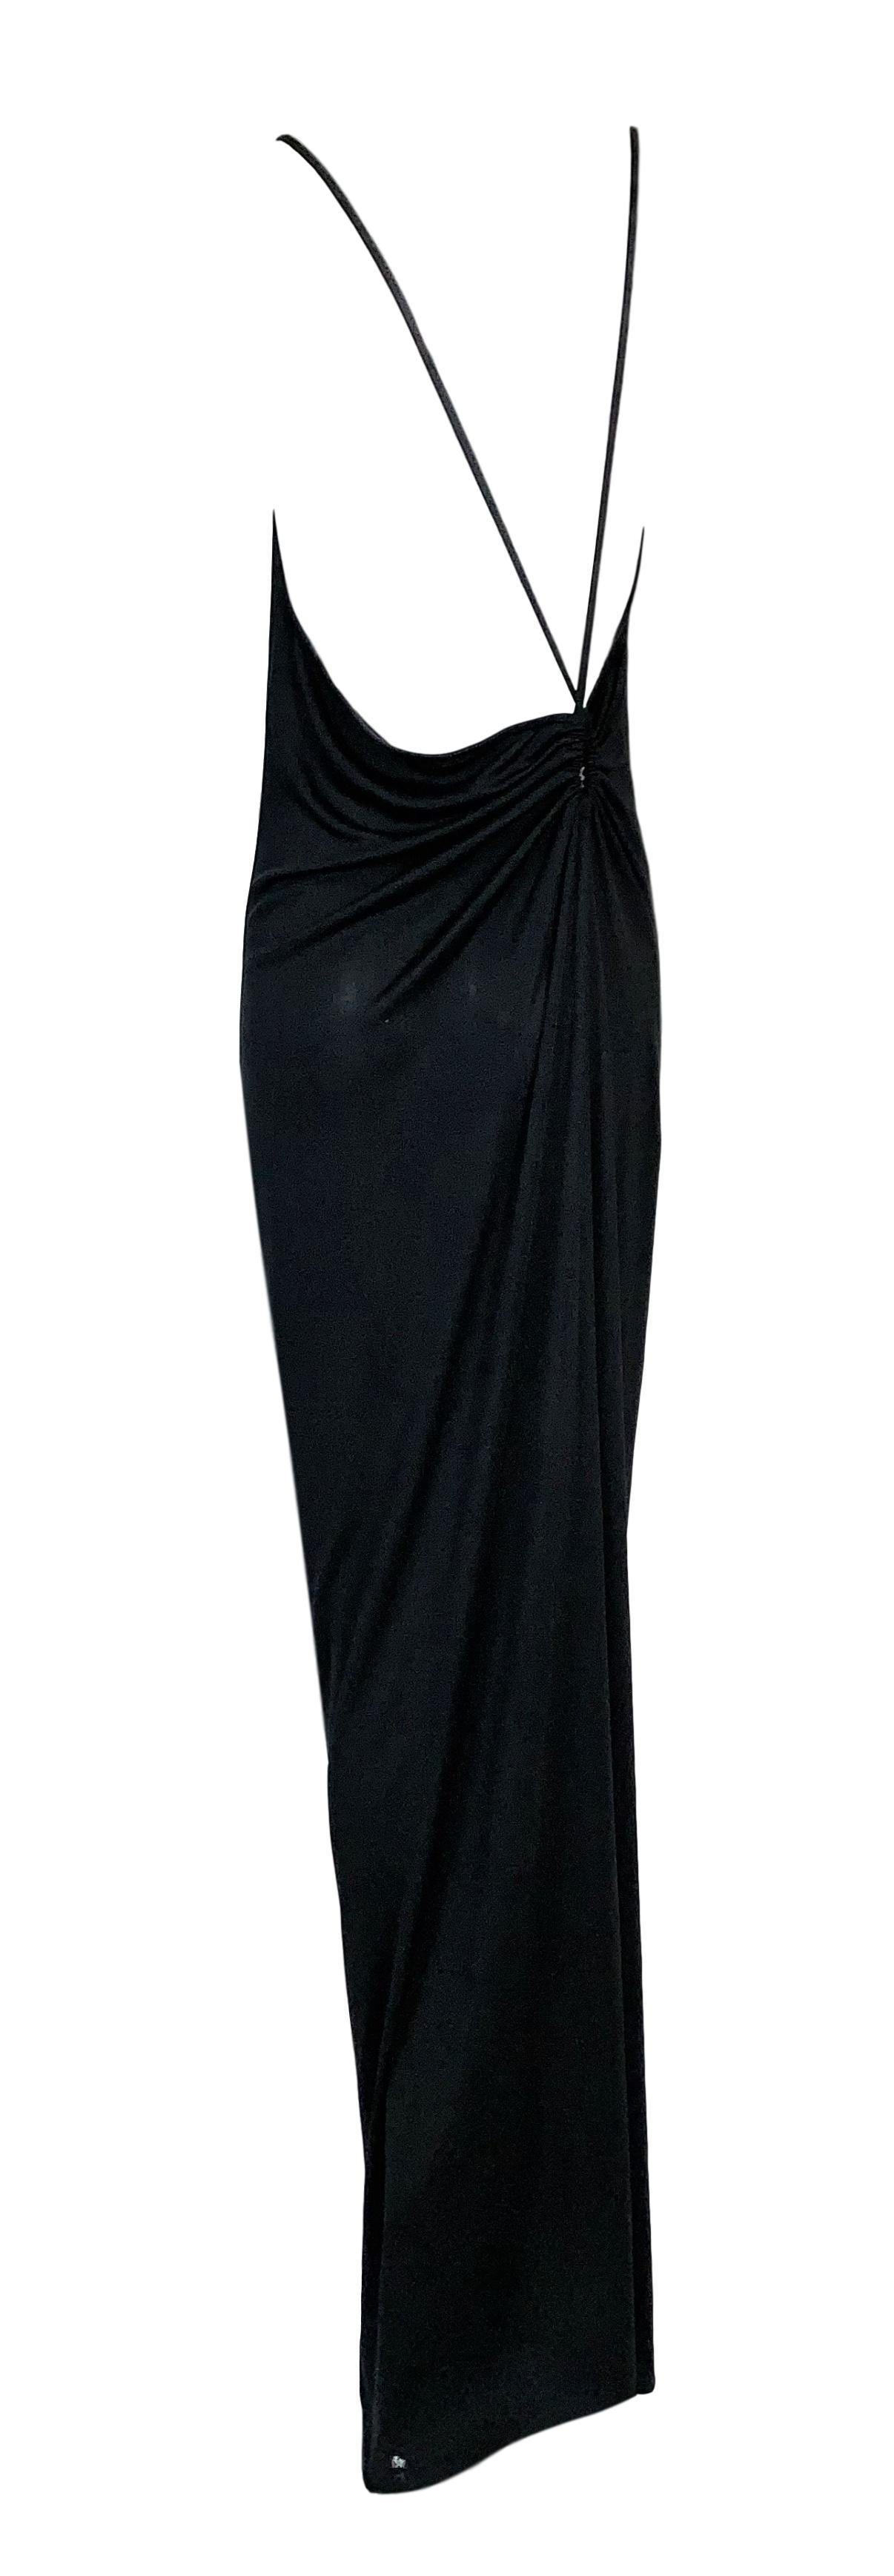 Women's 1999 Gucci by Tom Ford Plunging Strappy Back Long Black Silk Gown Dress 44